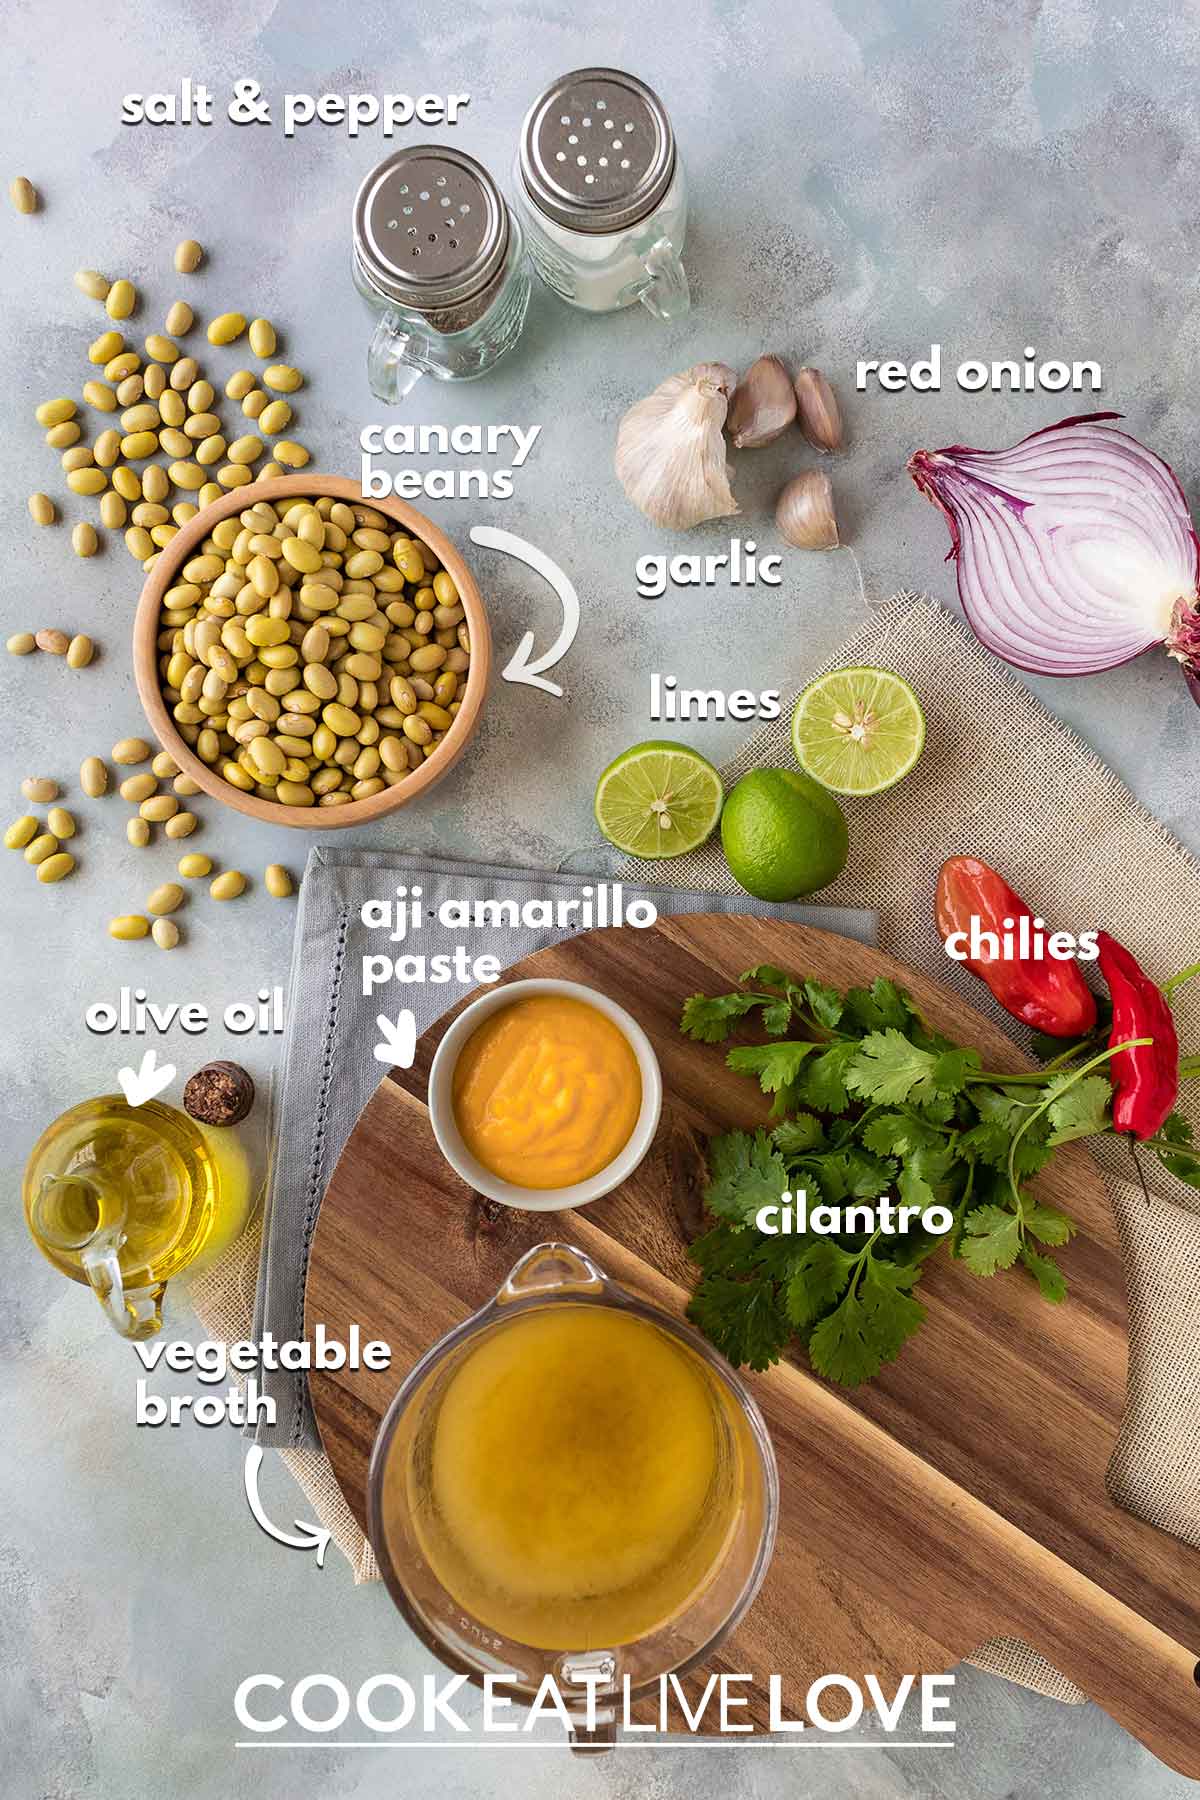 Ingredients to make peruvian beans on the table with text labels.